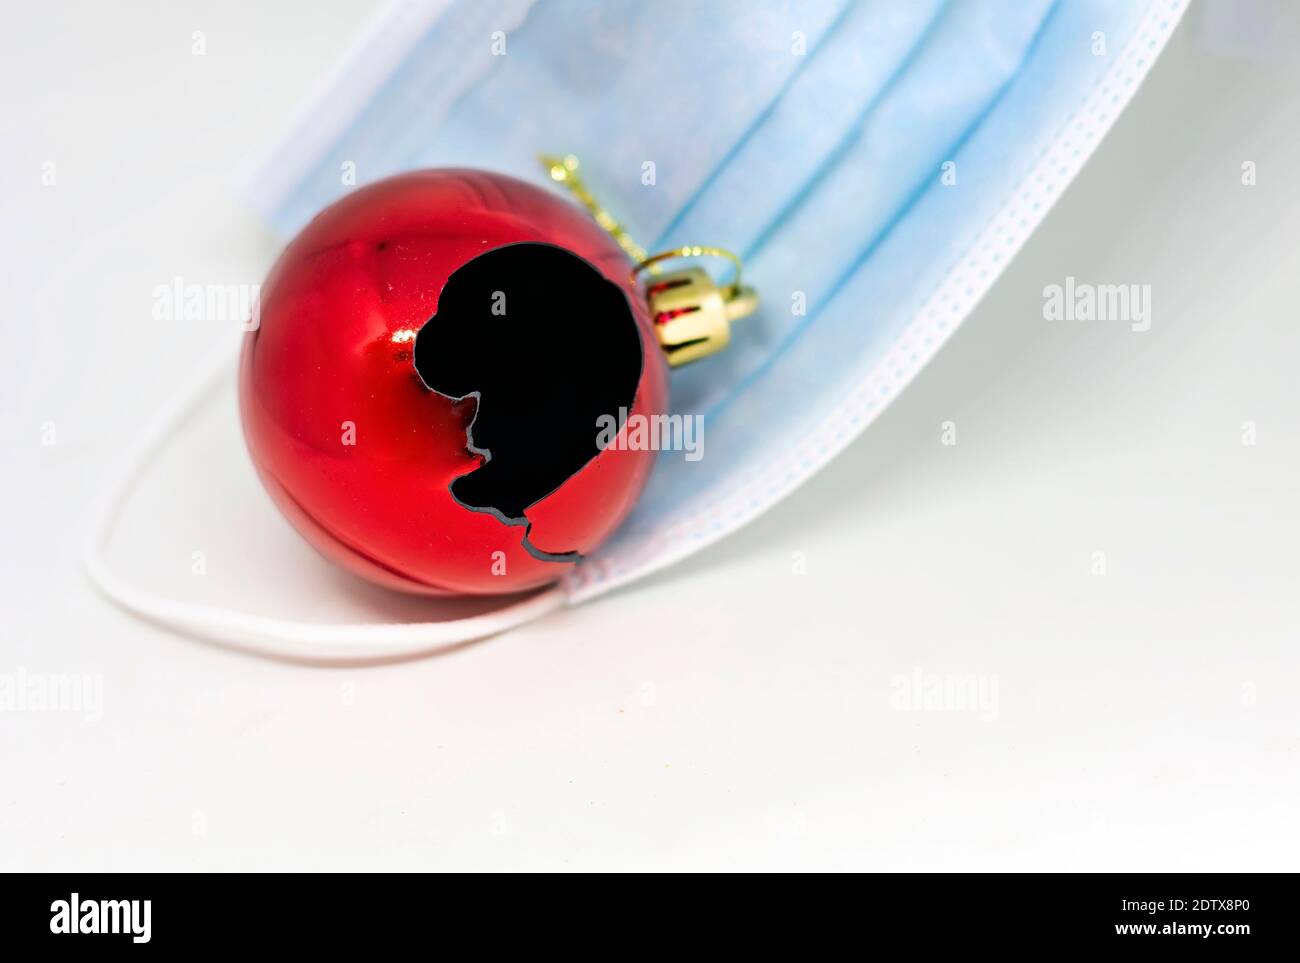 A broken decorative red Christmas tree bauble on a protective surgical mask on a white background. Christmas 2020 with the danger of the Covid-19 coro Stock Photo